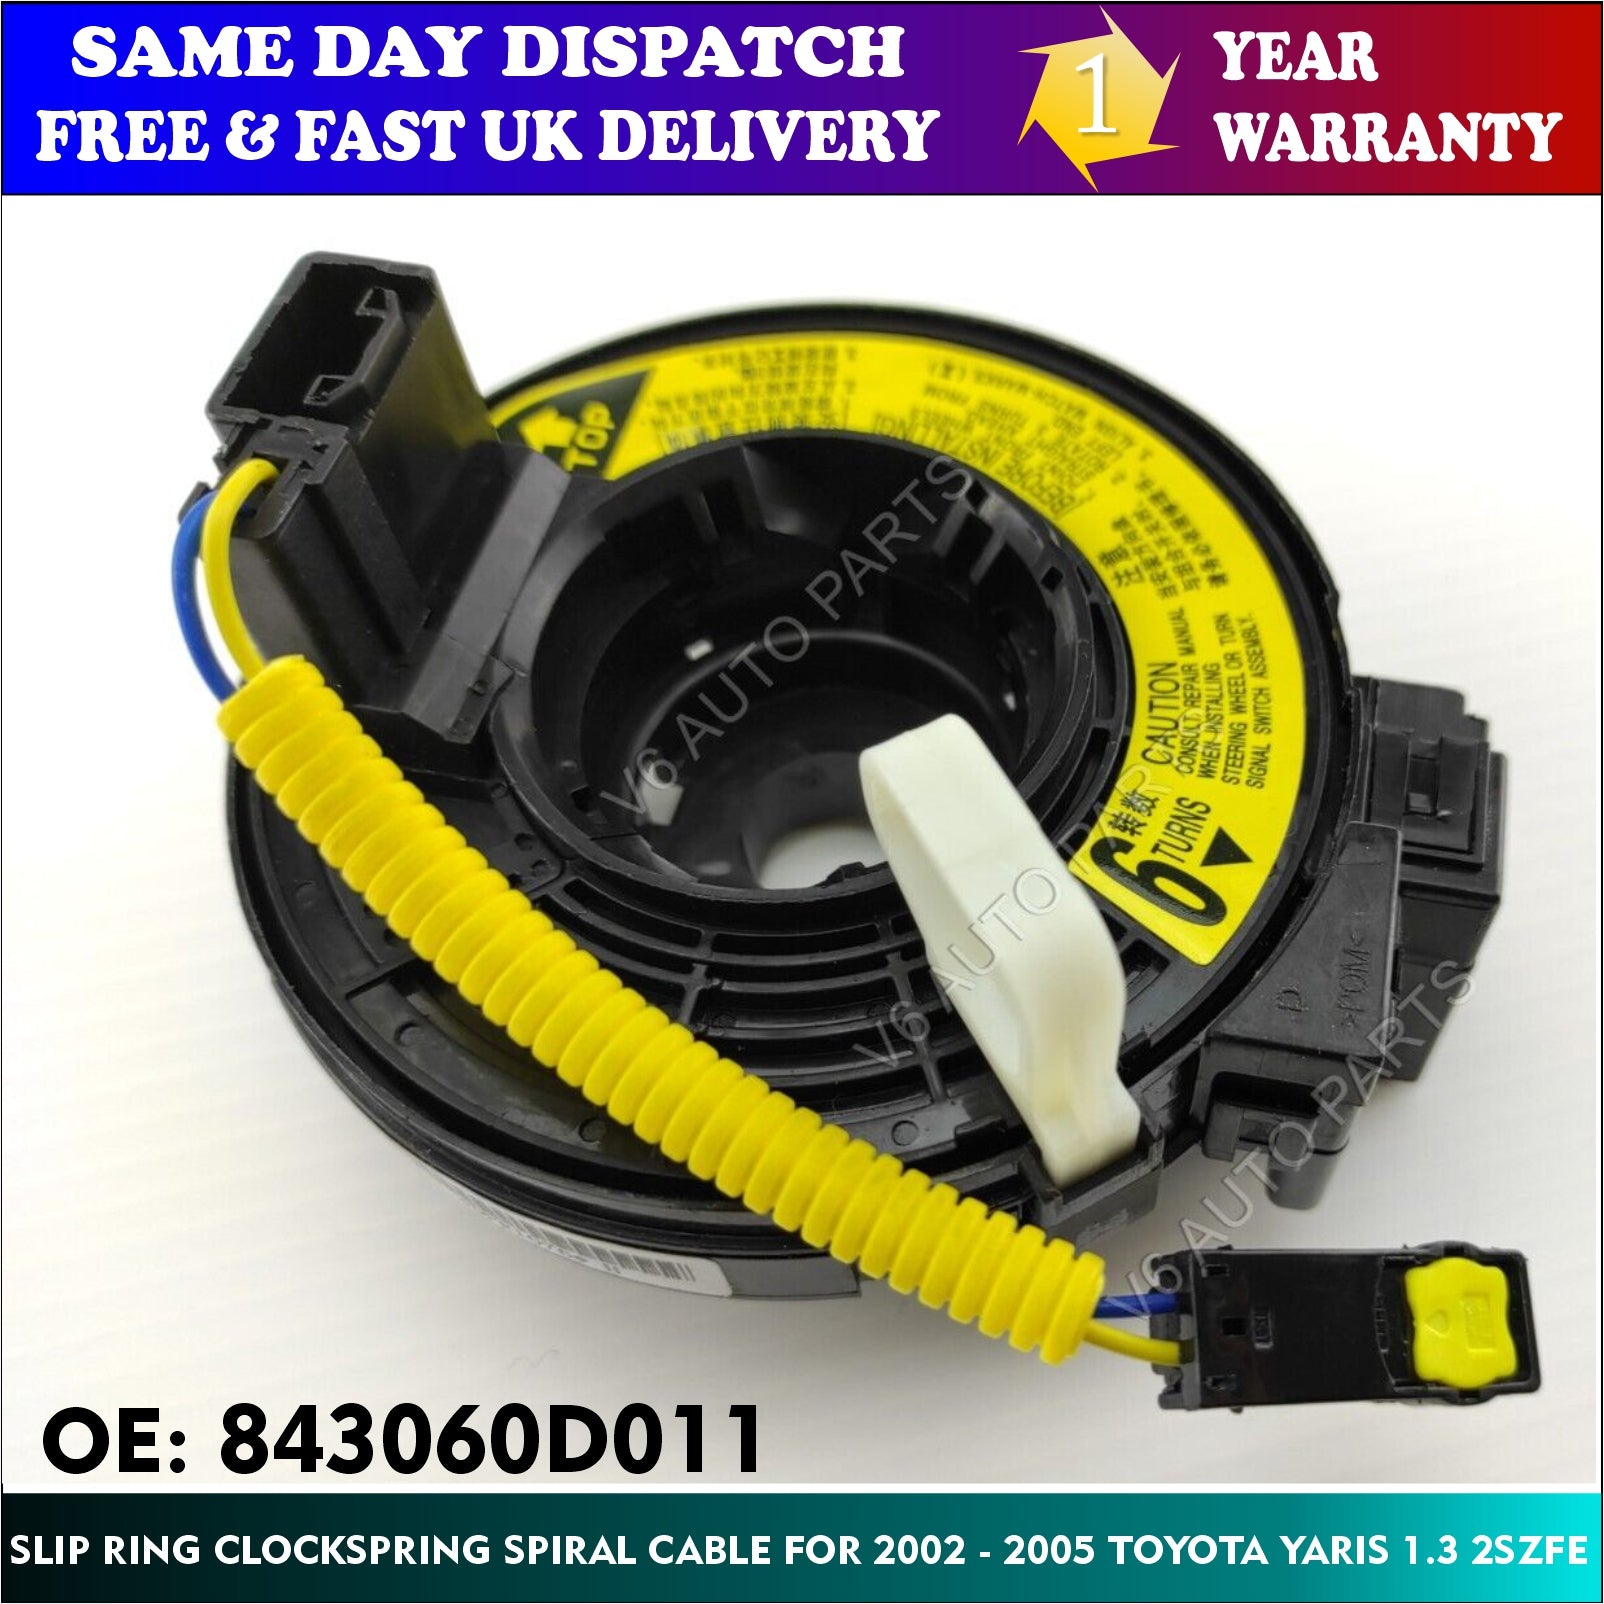 Slip Ring Clockspring Spiral Cable For 2002 - 2005 TOYOTA YARIS 1.3 2SZFE 84306-0D011